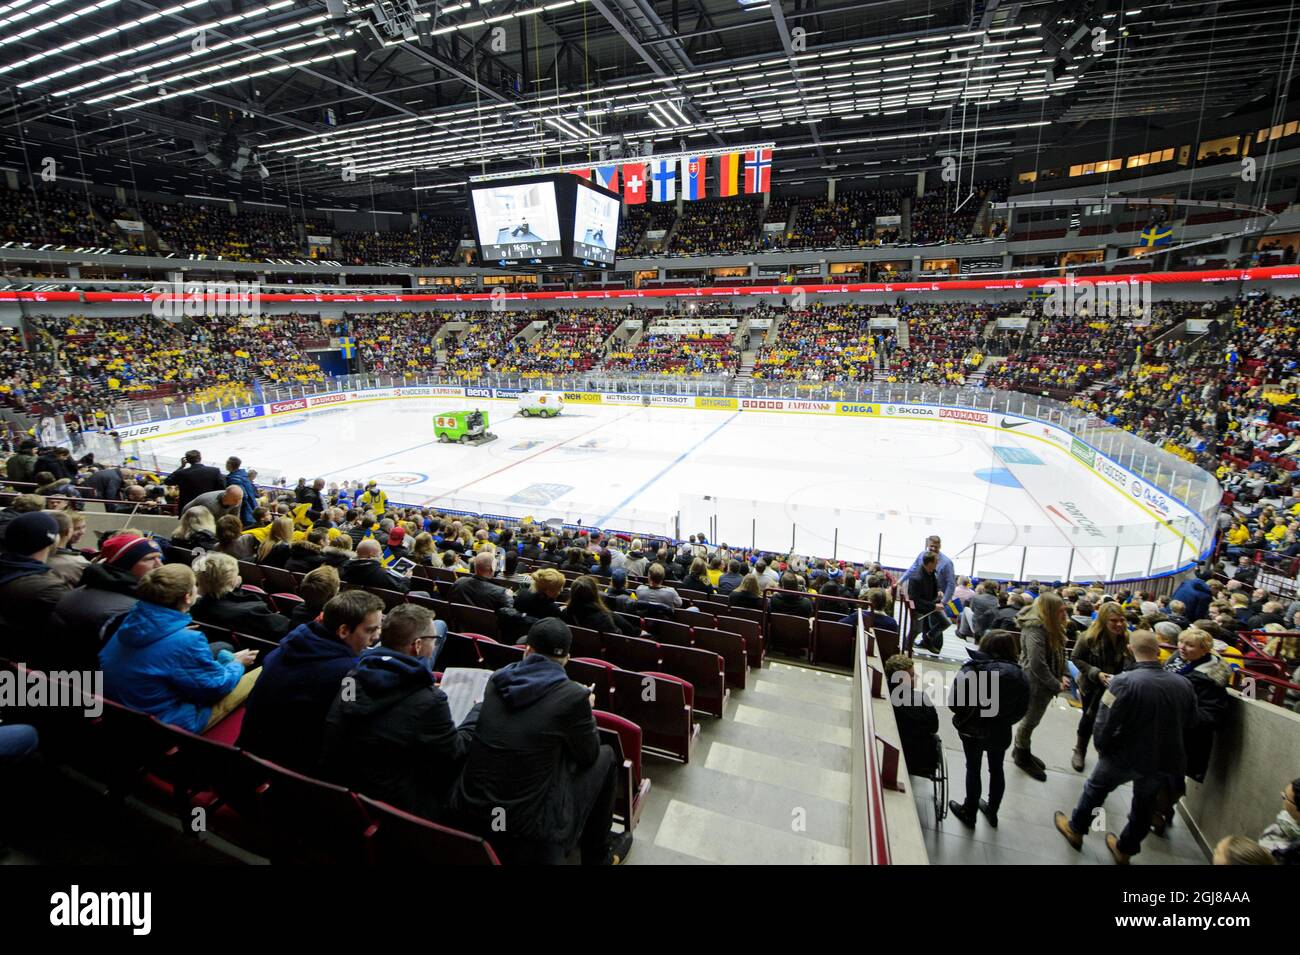 MALMO 2013-12-28 The ice is prepared ahead of the the IIHF World Junior Championship preliminary round group B icehockey match between Sweden and Finland at Malmo Arena in Malmo, Sweden, on Dec. 28, 2013. Photo: Ludvig Thunman / TT / code 10600  Stock Photo